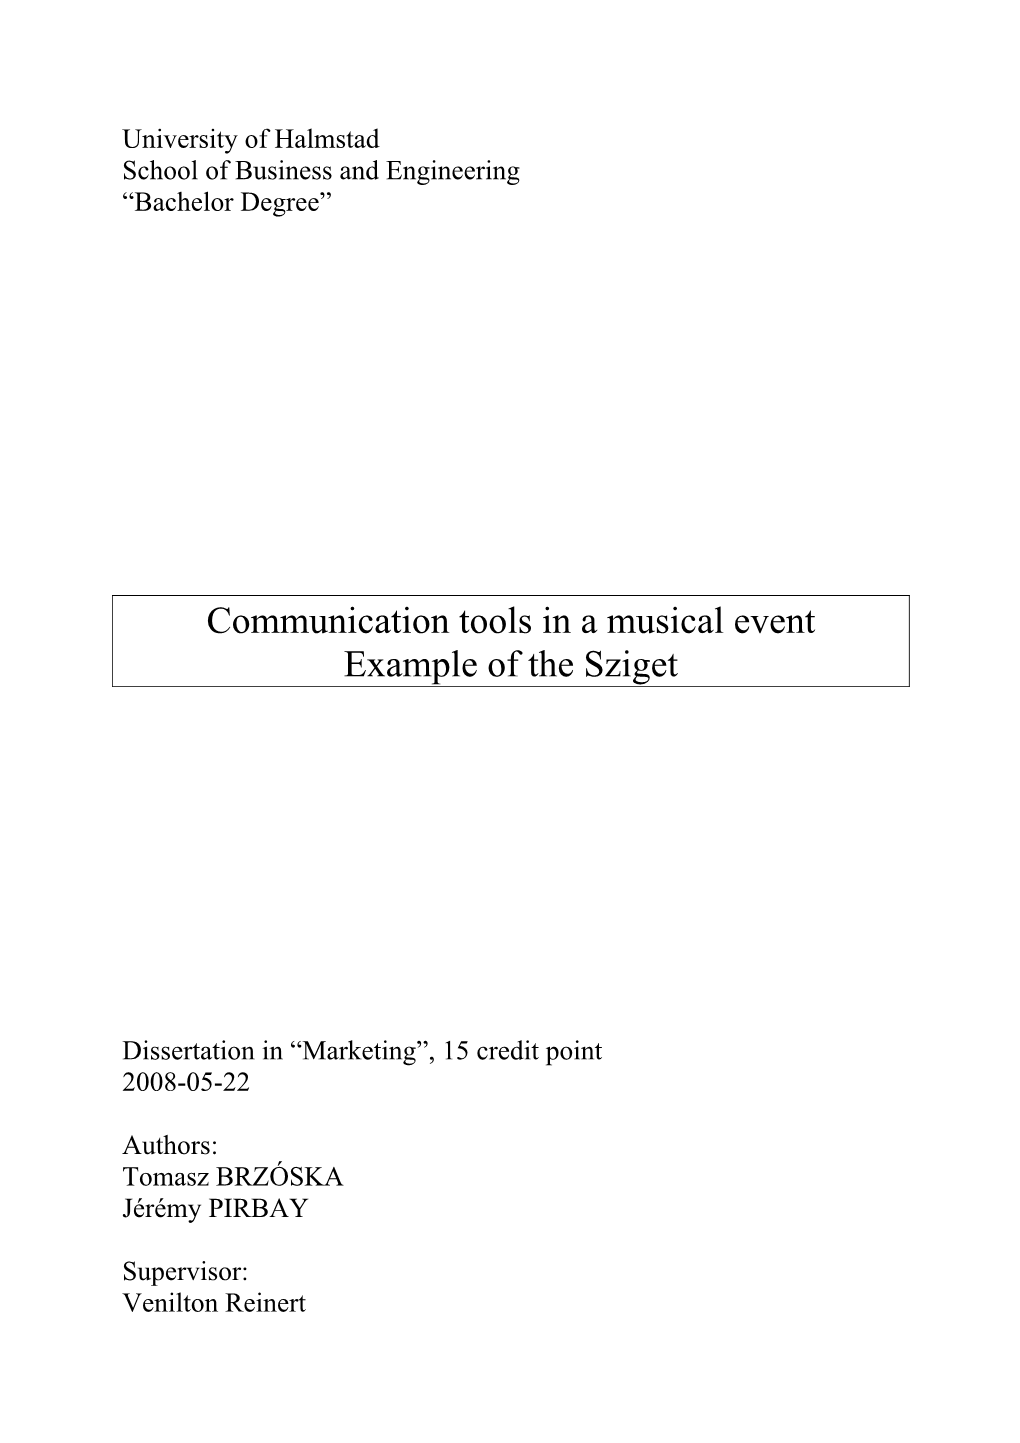 Communication Tools in a Musical Event Example of the Sziget